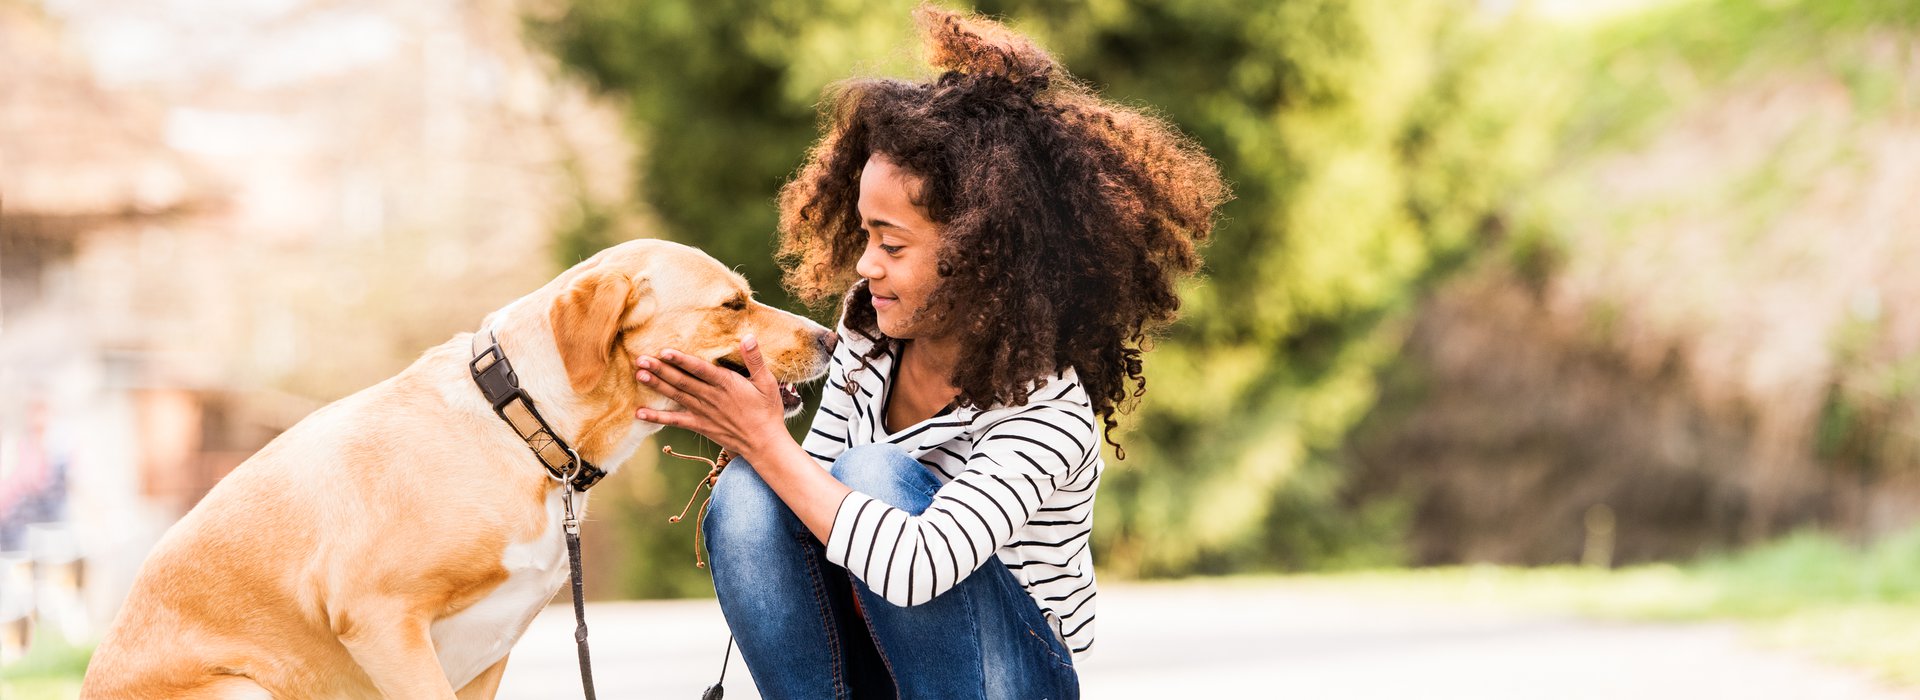 Beautiful african american girl with curly hair outdoors with her cute dog, sitting on skateboard.